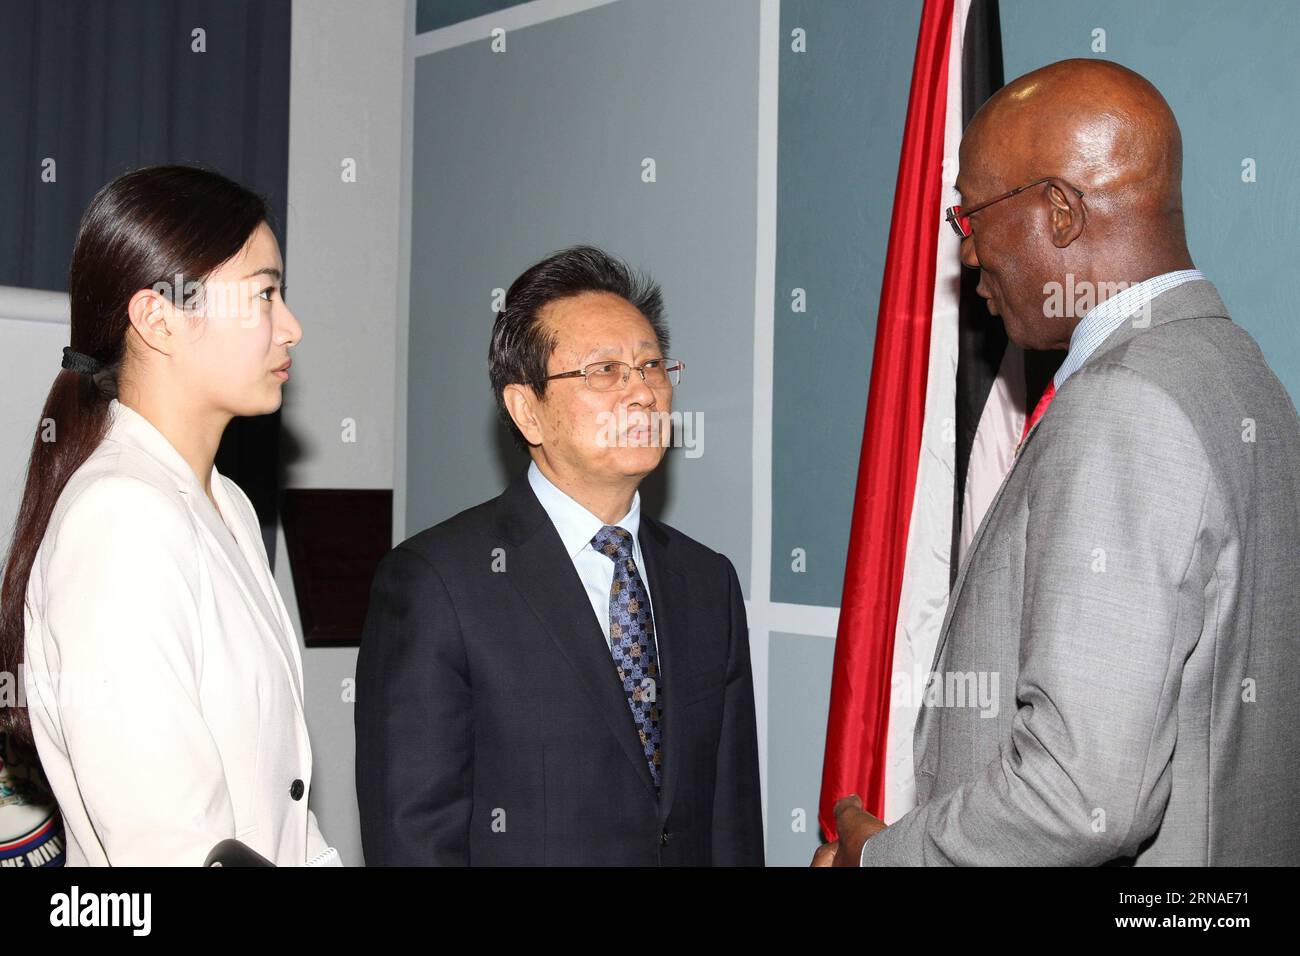 (160122) -- PORT OF SPAIN, Jan. 22, 2016 -- Chen Changzhi (C), vice chairman of the Standing Committee of China s National People s Congress, meets with Trinidad and Tobago s Prime Minister Keith Rowley (R), in Port of Spain, capital of Trinidad and Tobago, on Jan. 20, 2016. Chen is on a visit to Trinidad and Tobago from Jan. 20 to 22. ) TRINIDAD AND TOBAGO-PORT OF SPAIN-CHINA-CHEN CHANGZHI-VISIT GaoxXing PUBLICATIONxNOTxINxCHN   160122 Port of Spain Jan 22 2016 Chen Changzhi C Vice Chairman of The thing Committee of China S National Celebrities S Congress Meets With Trinidad and Tobago S Prim Stock Photo